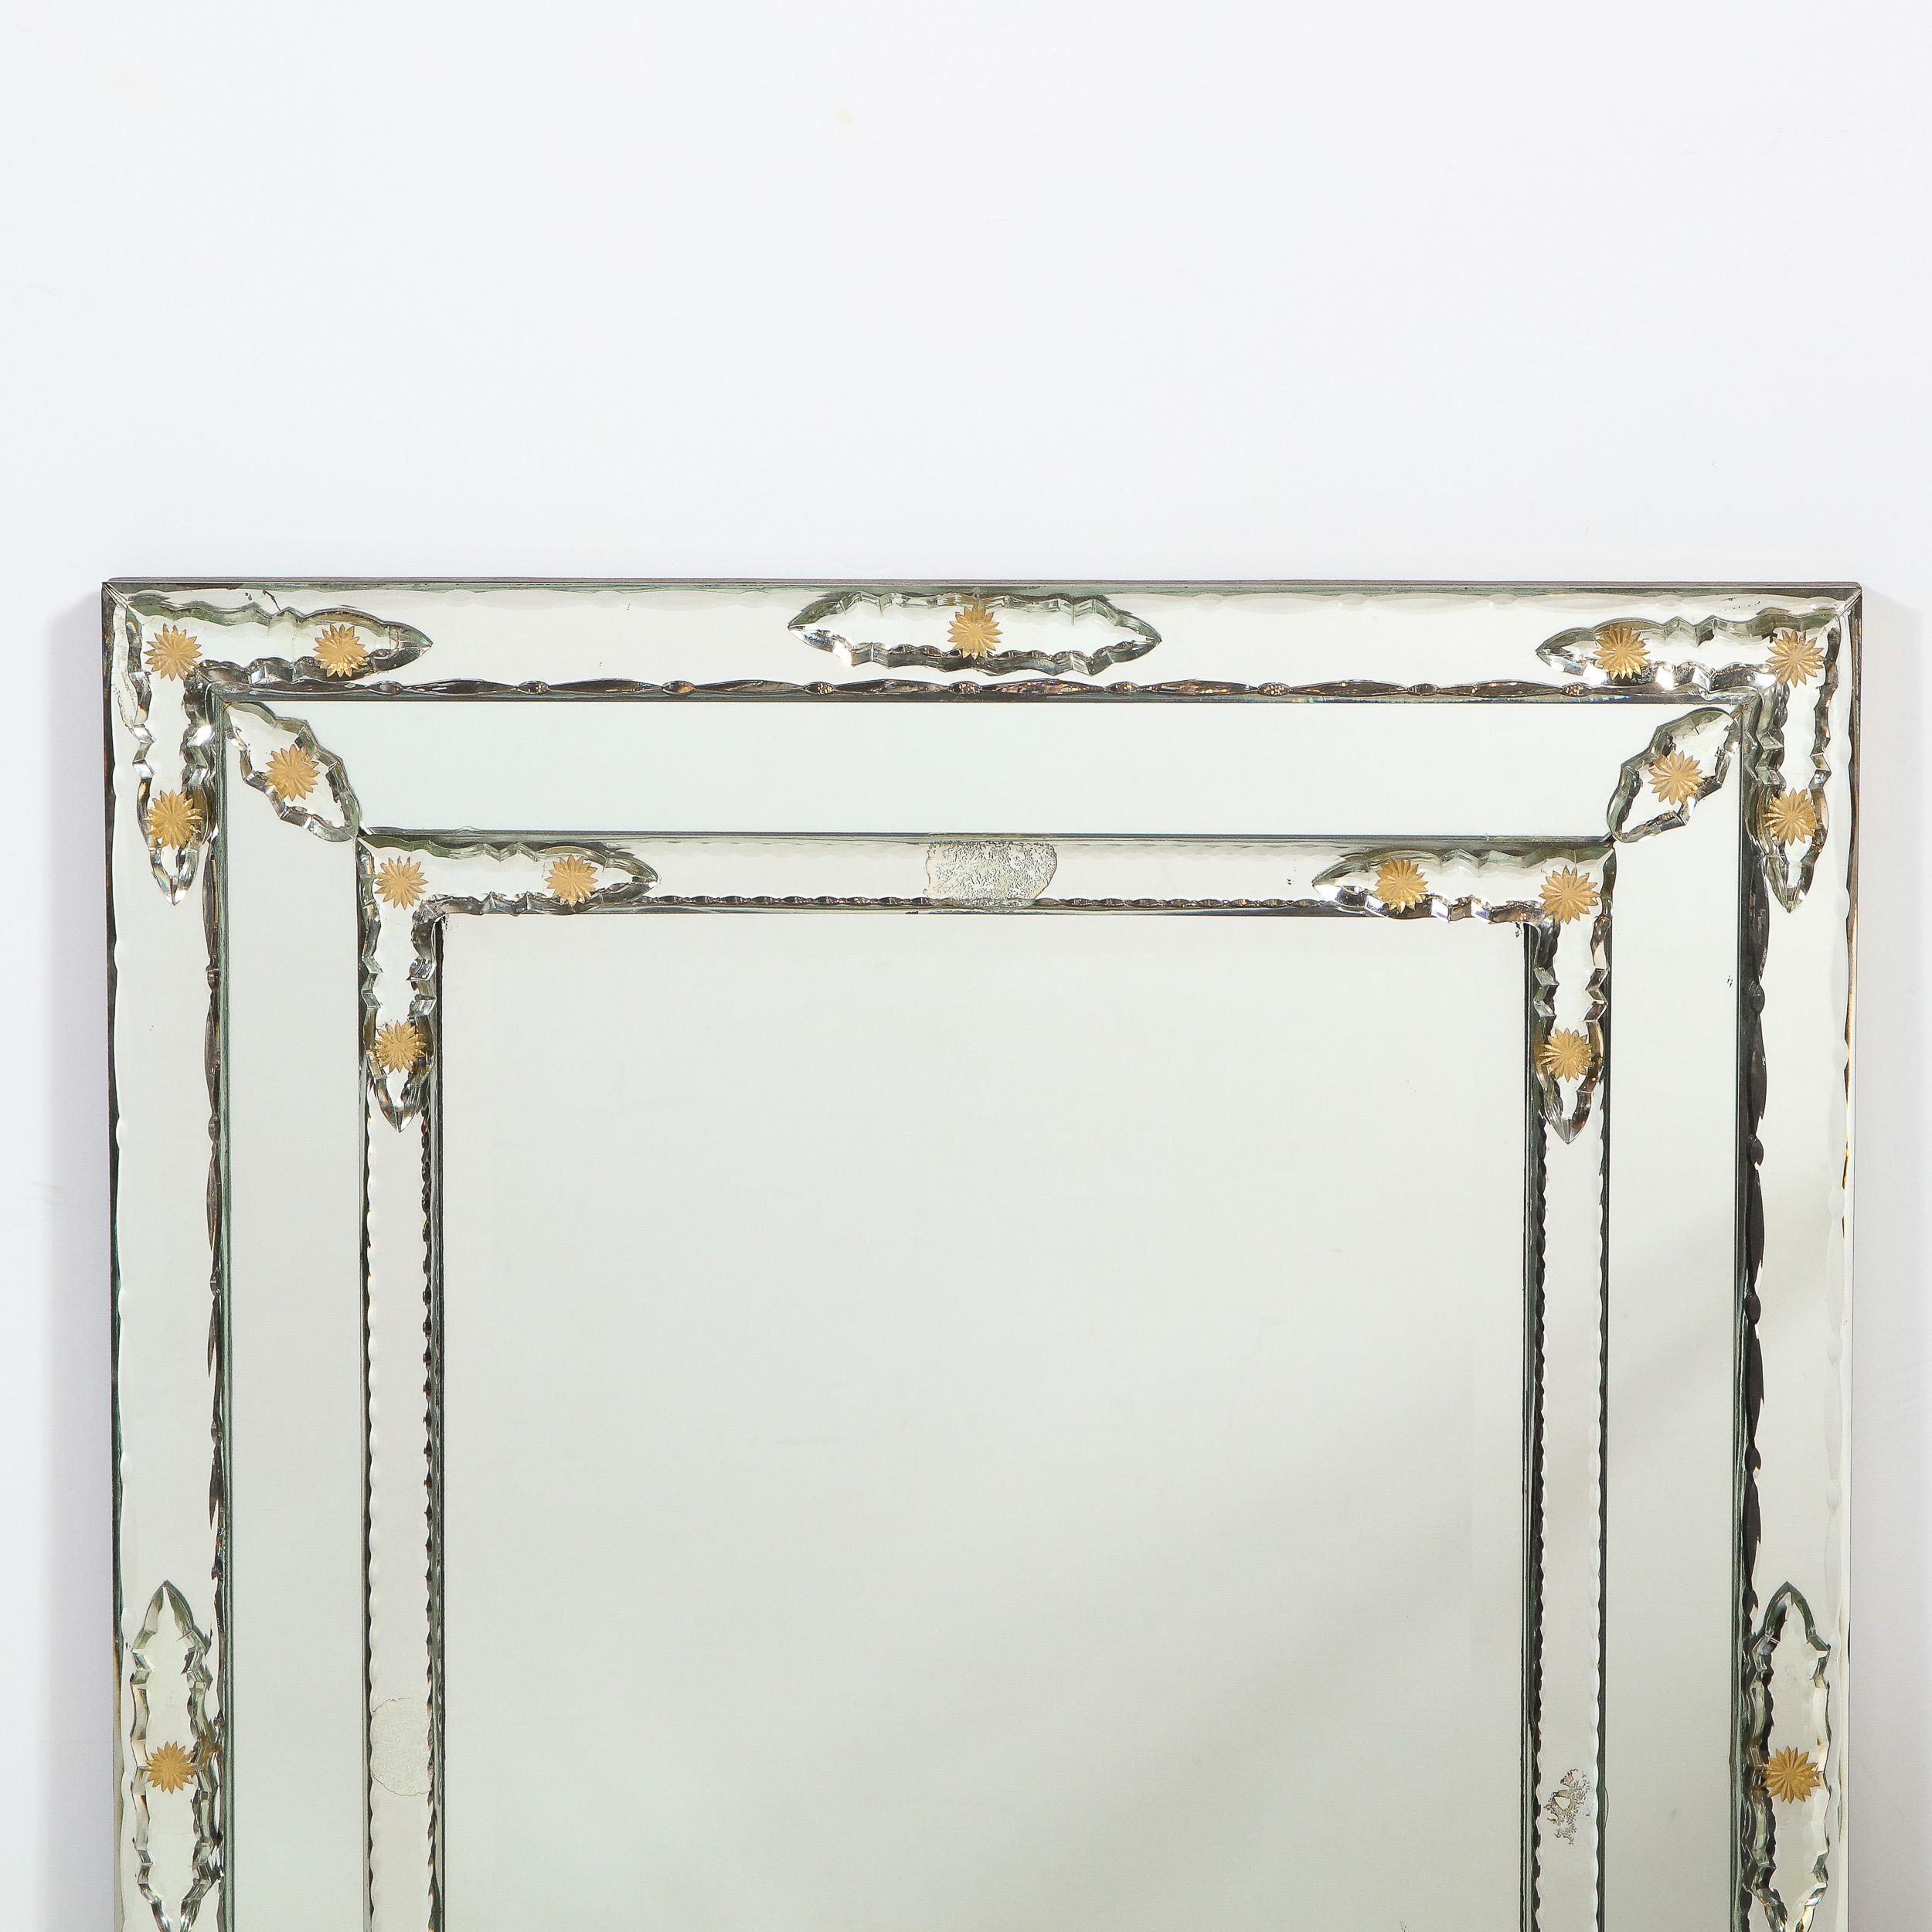 This stunning Mid-Century Modern Venetian mirror was realized in Italy, circa 1950. It features a rectangular body with concentric tiers echoing the rectangular silhouette of the piece. The border of the piece is gilded, a material which recurs in